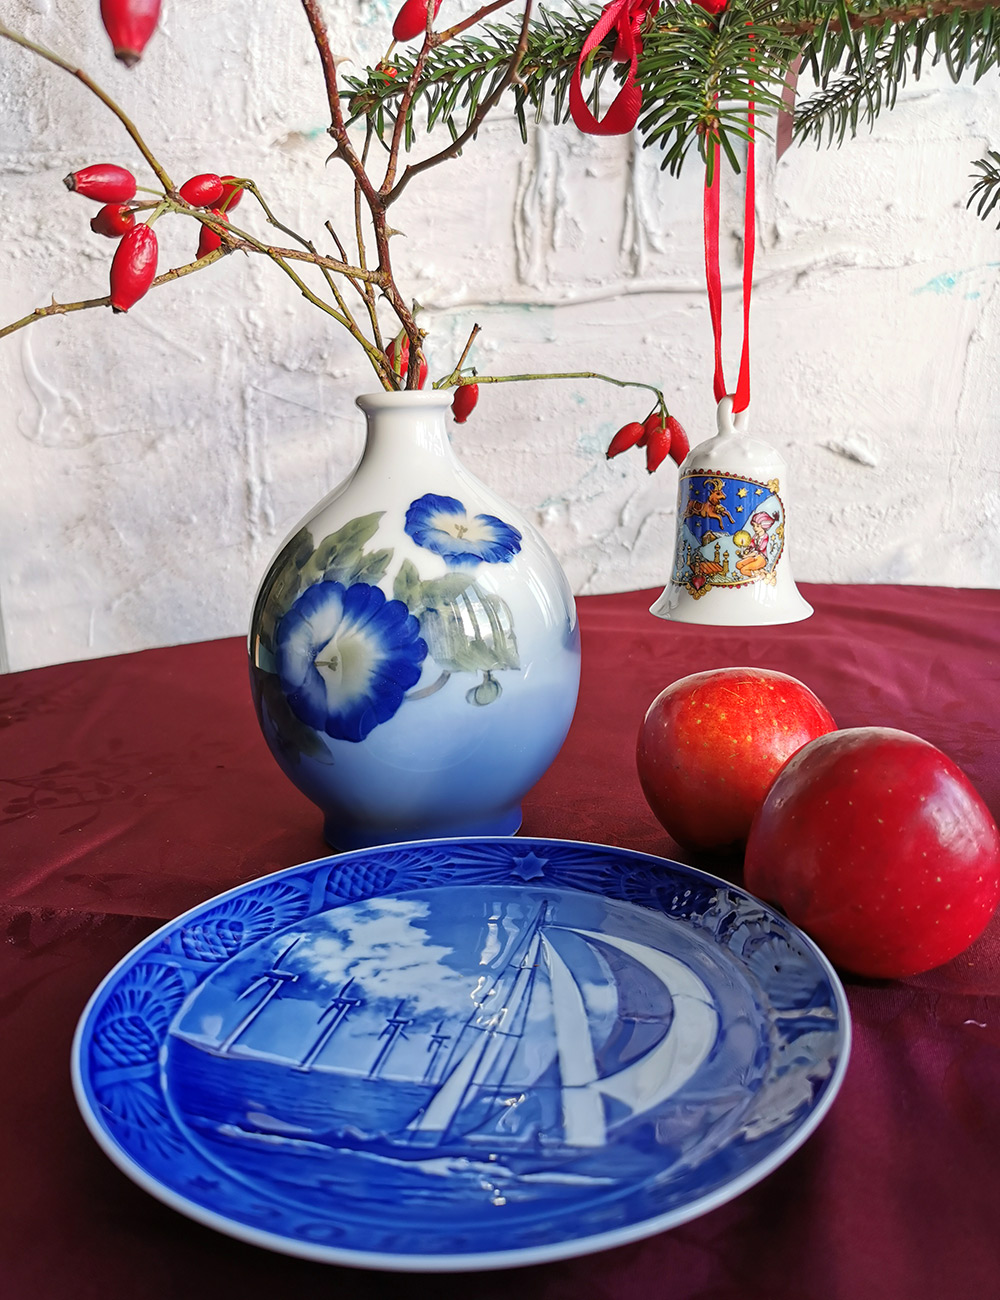 Royal Copenhagen porcelain vase paired with a beautiful Royal Copenhagen Christmas plate and a Hutschenreuther Christmas bell